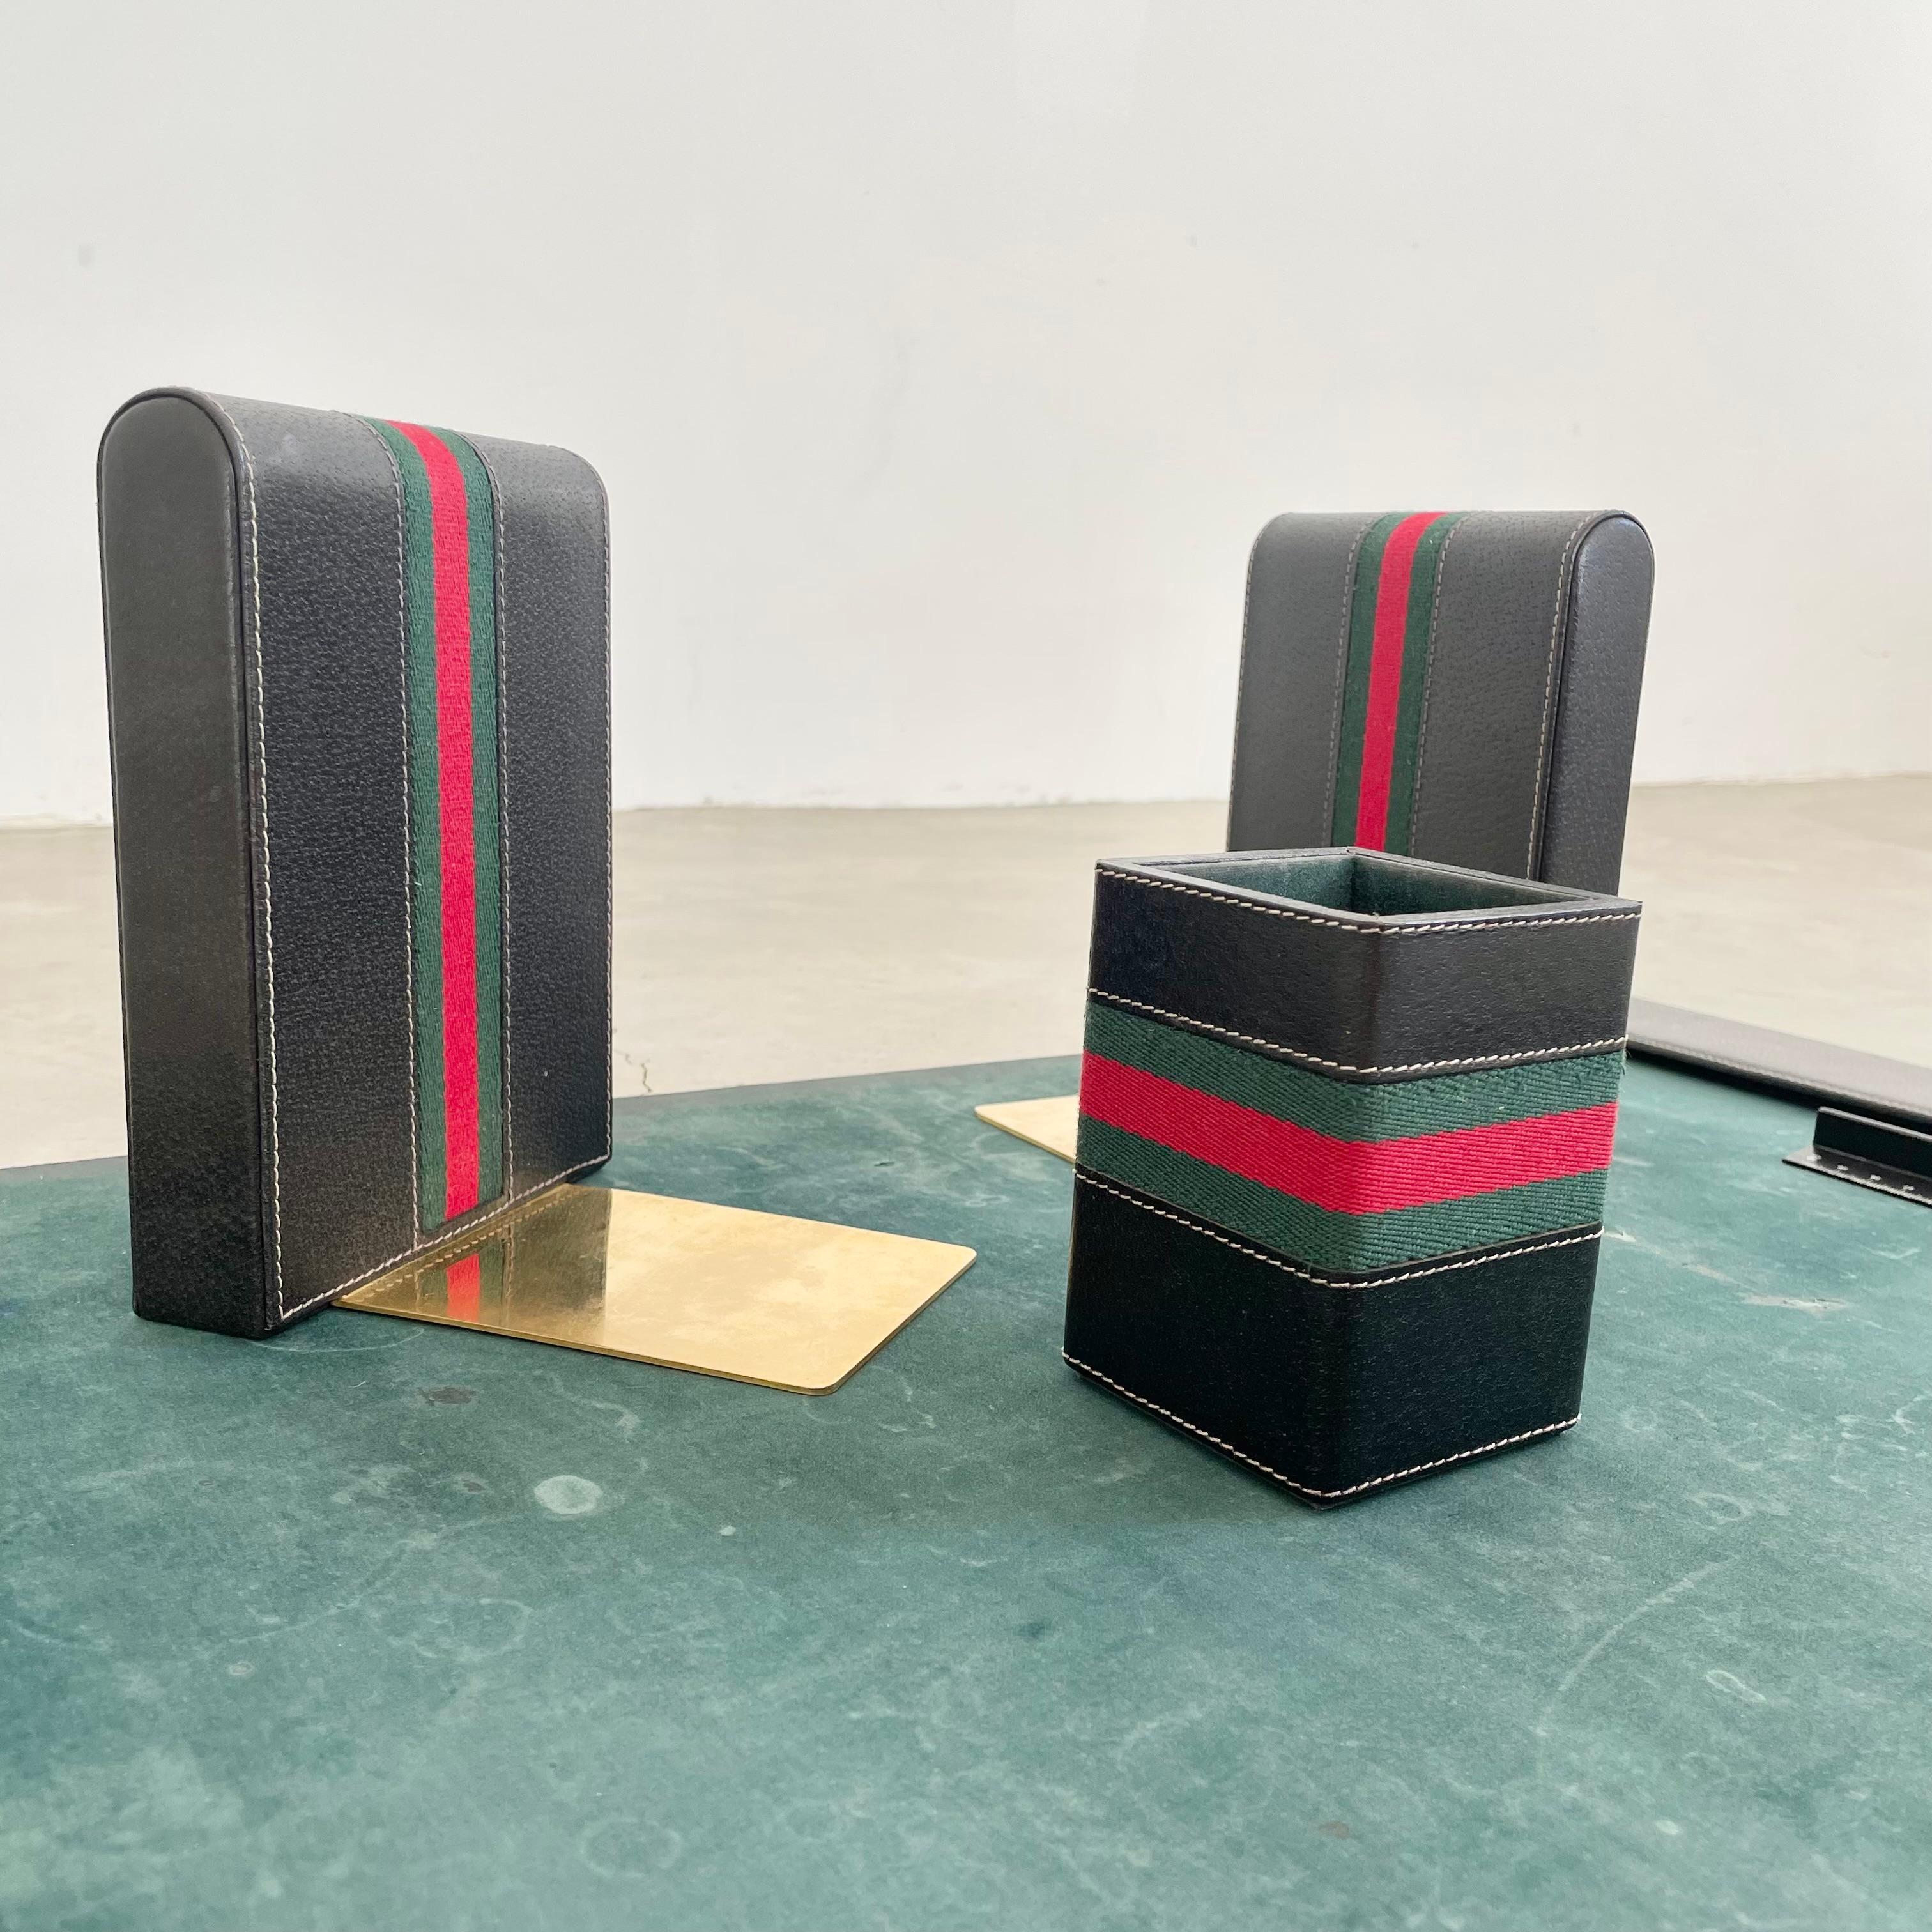 Gucci Leather and Velvet Desk Set, 1980s Italy For Sale 5